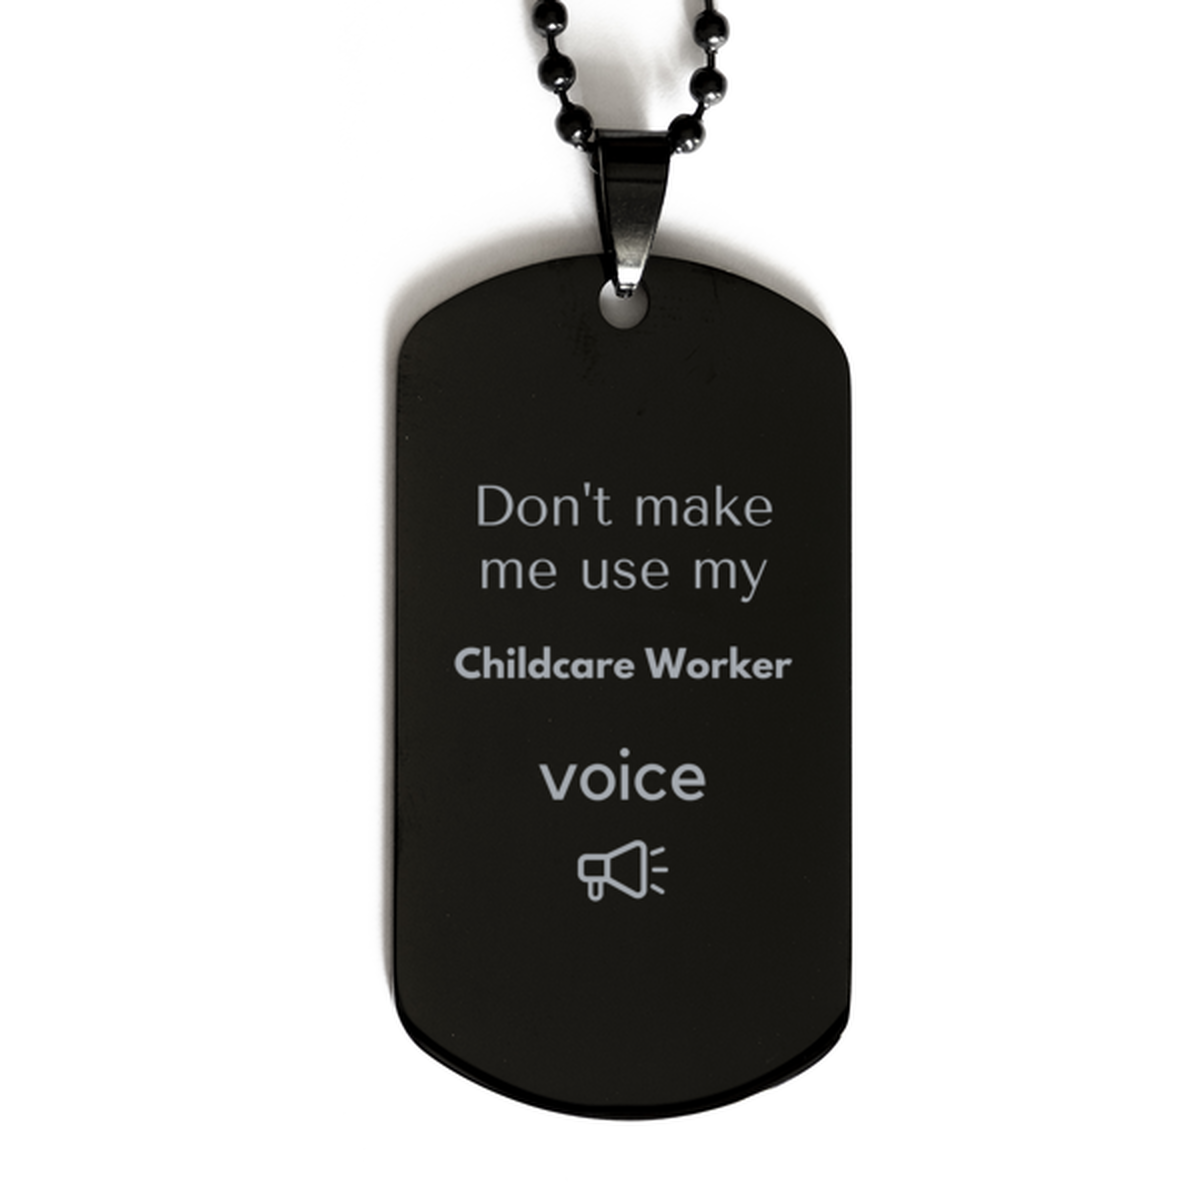 Don't make me use my Childcare Worker voice, Sarcasm Childcare Worker Gifts, Christmas Childcare Worker Black Dog Tag Birthday Unique Gifts For Childcare Worker Coworkers, Men, Women, Colleague, Friends